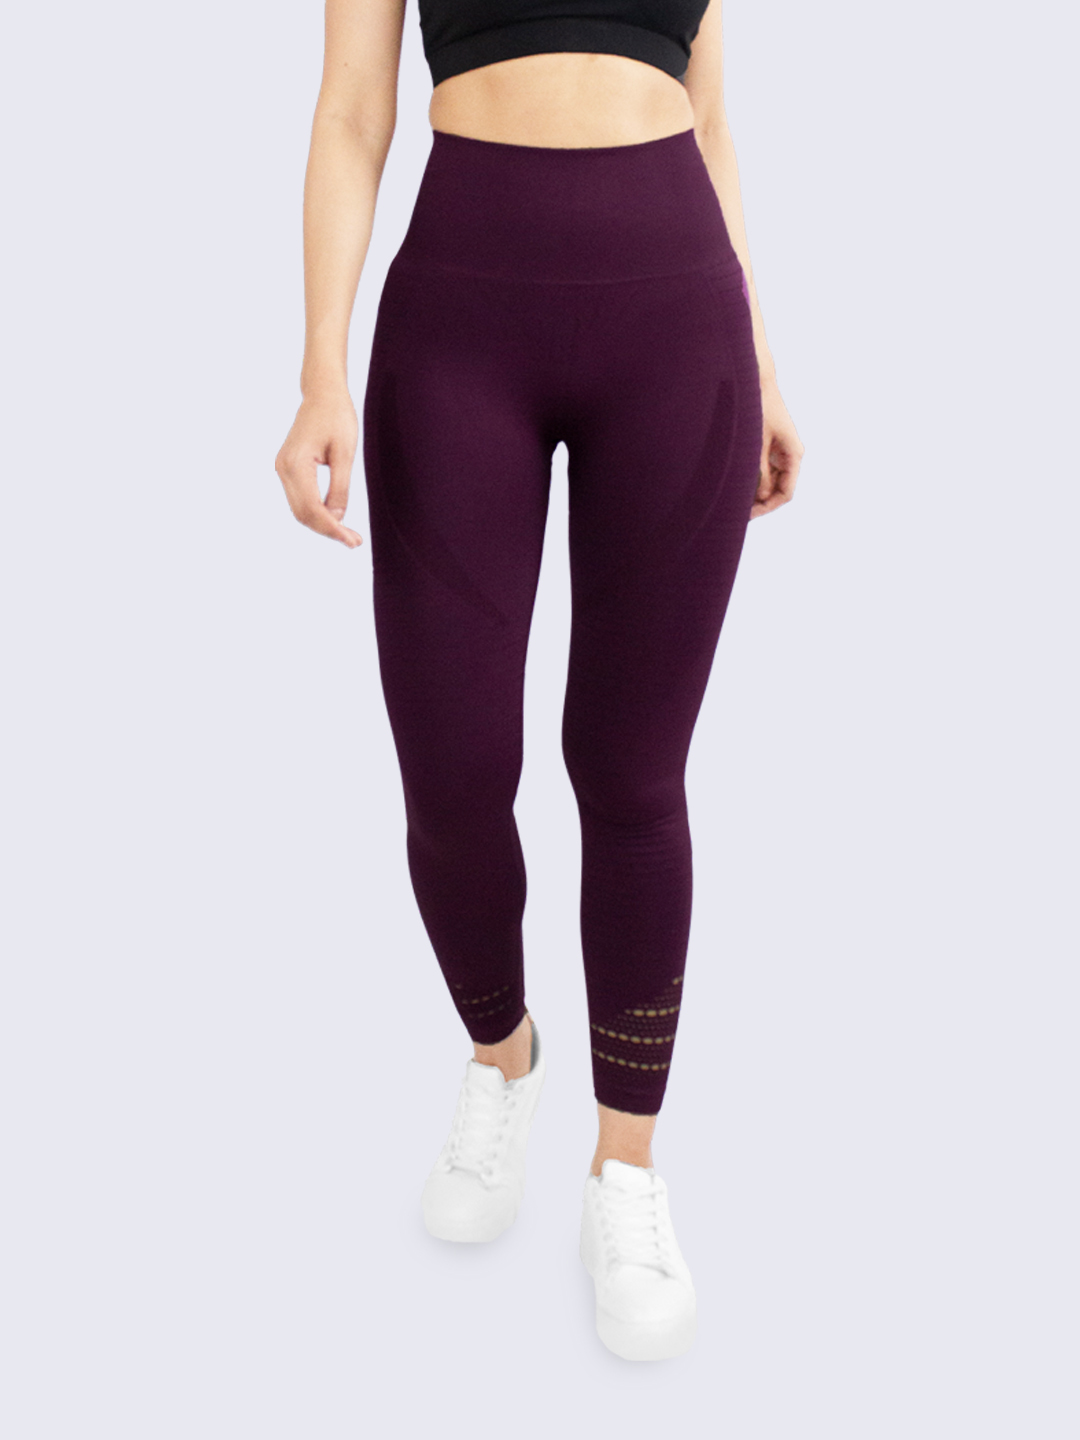 Mimi by Michelle Salins Compression Patterned Ribbed Sculpt Full Length Leggings – Magenta